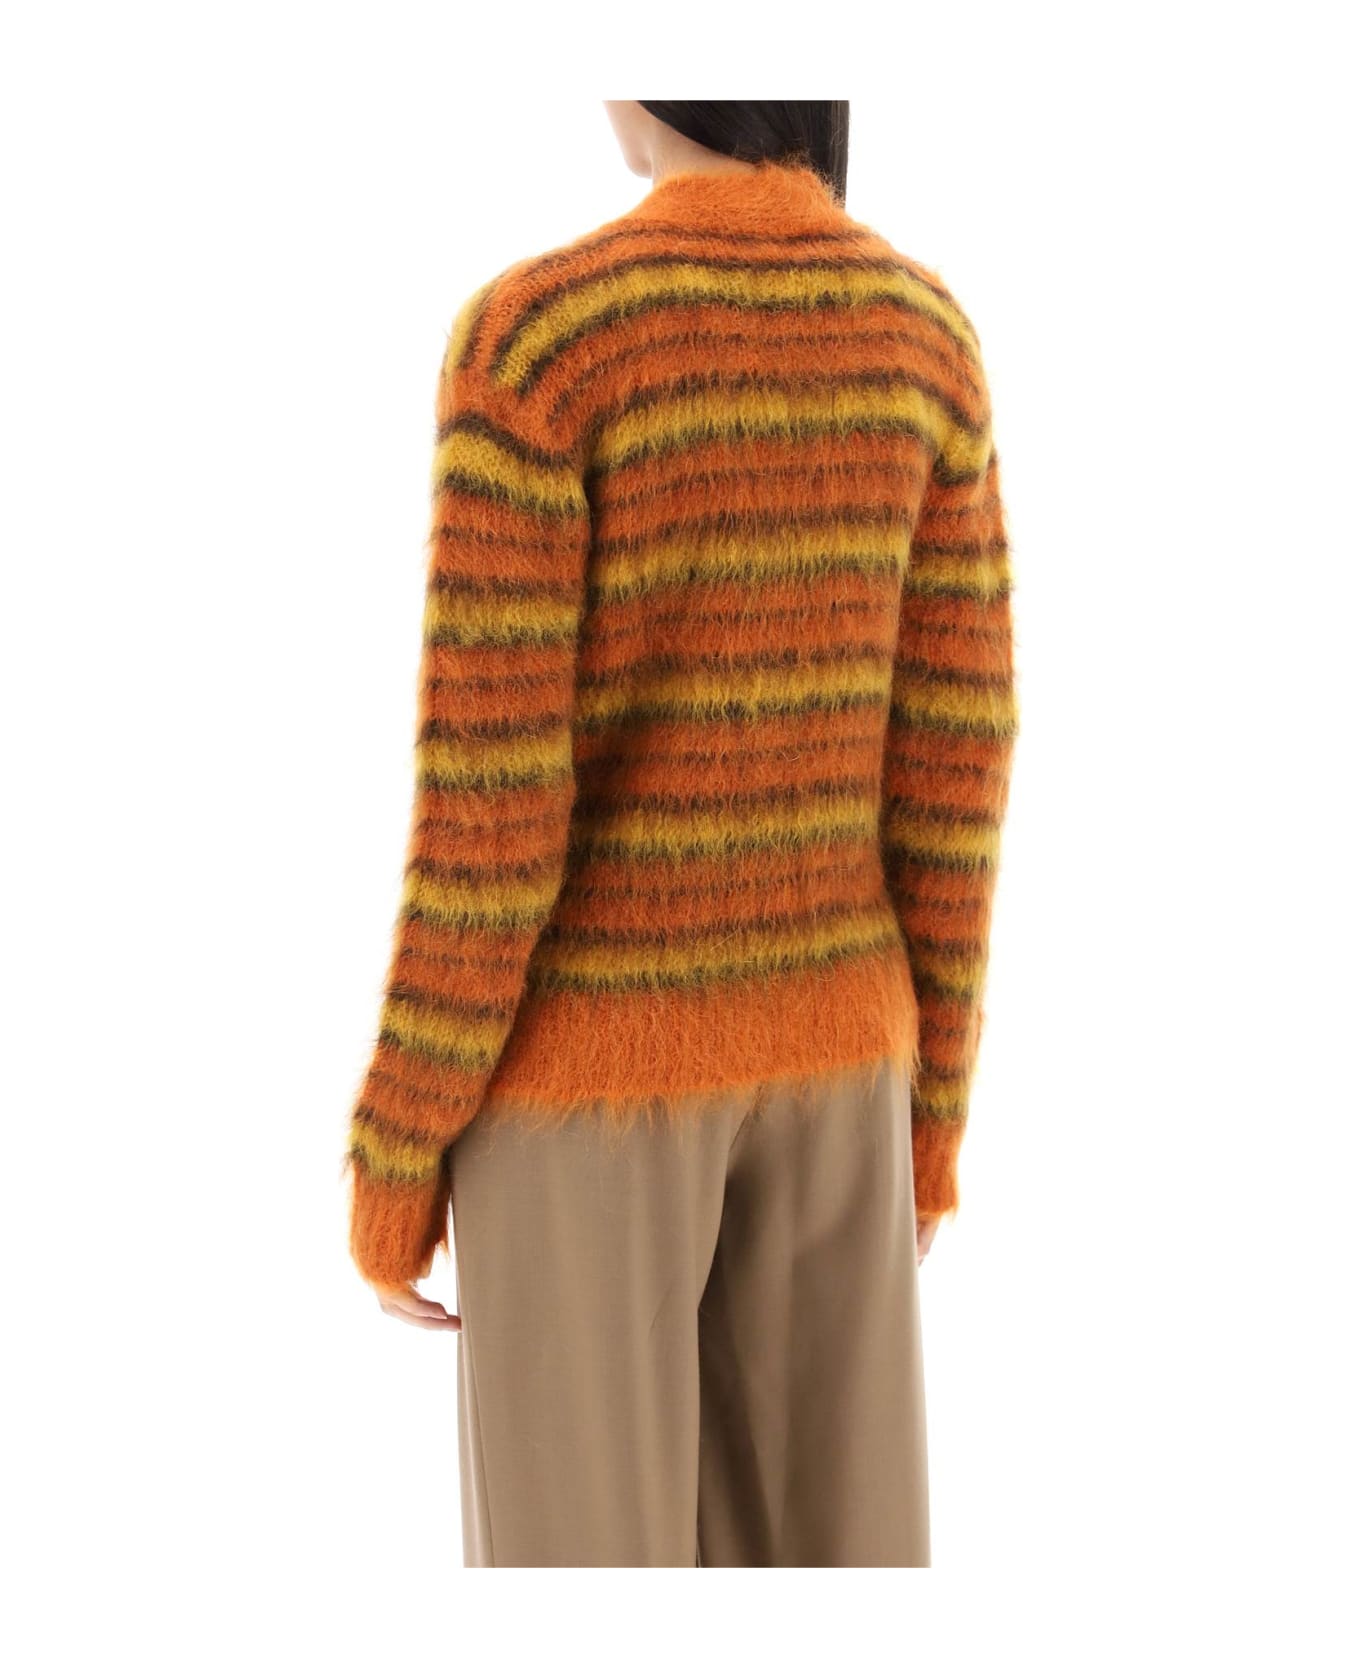 Marni Cardigan In Striped Brushed Mohair - Brick Red